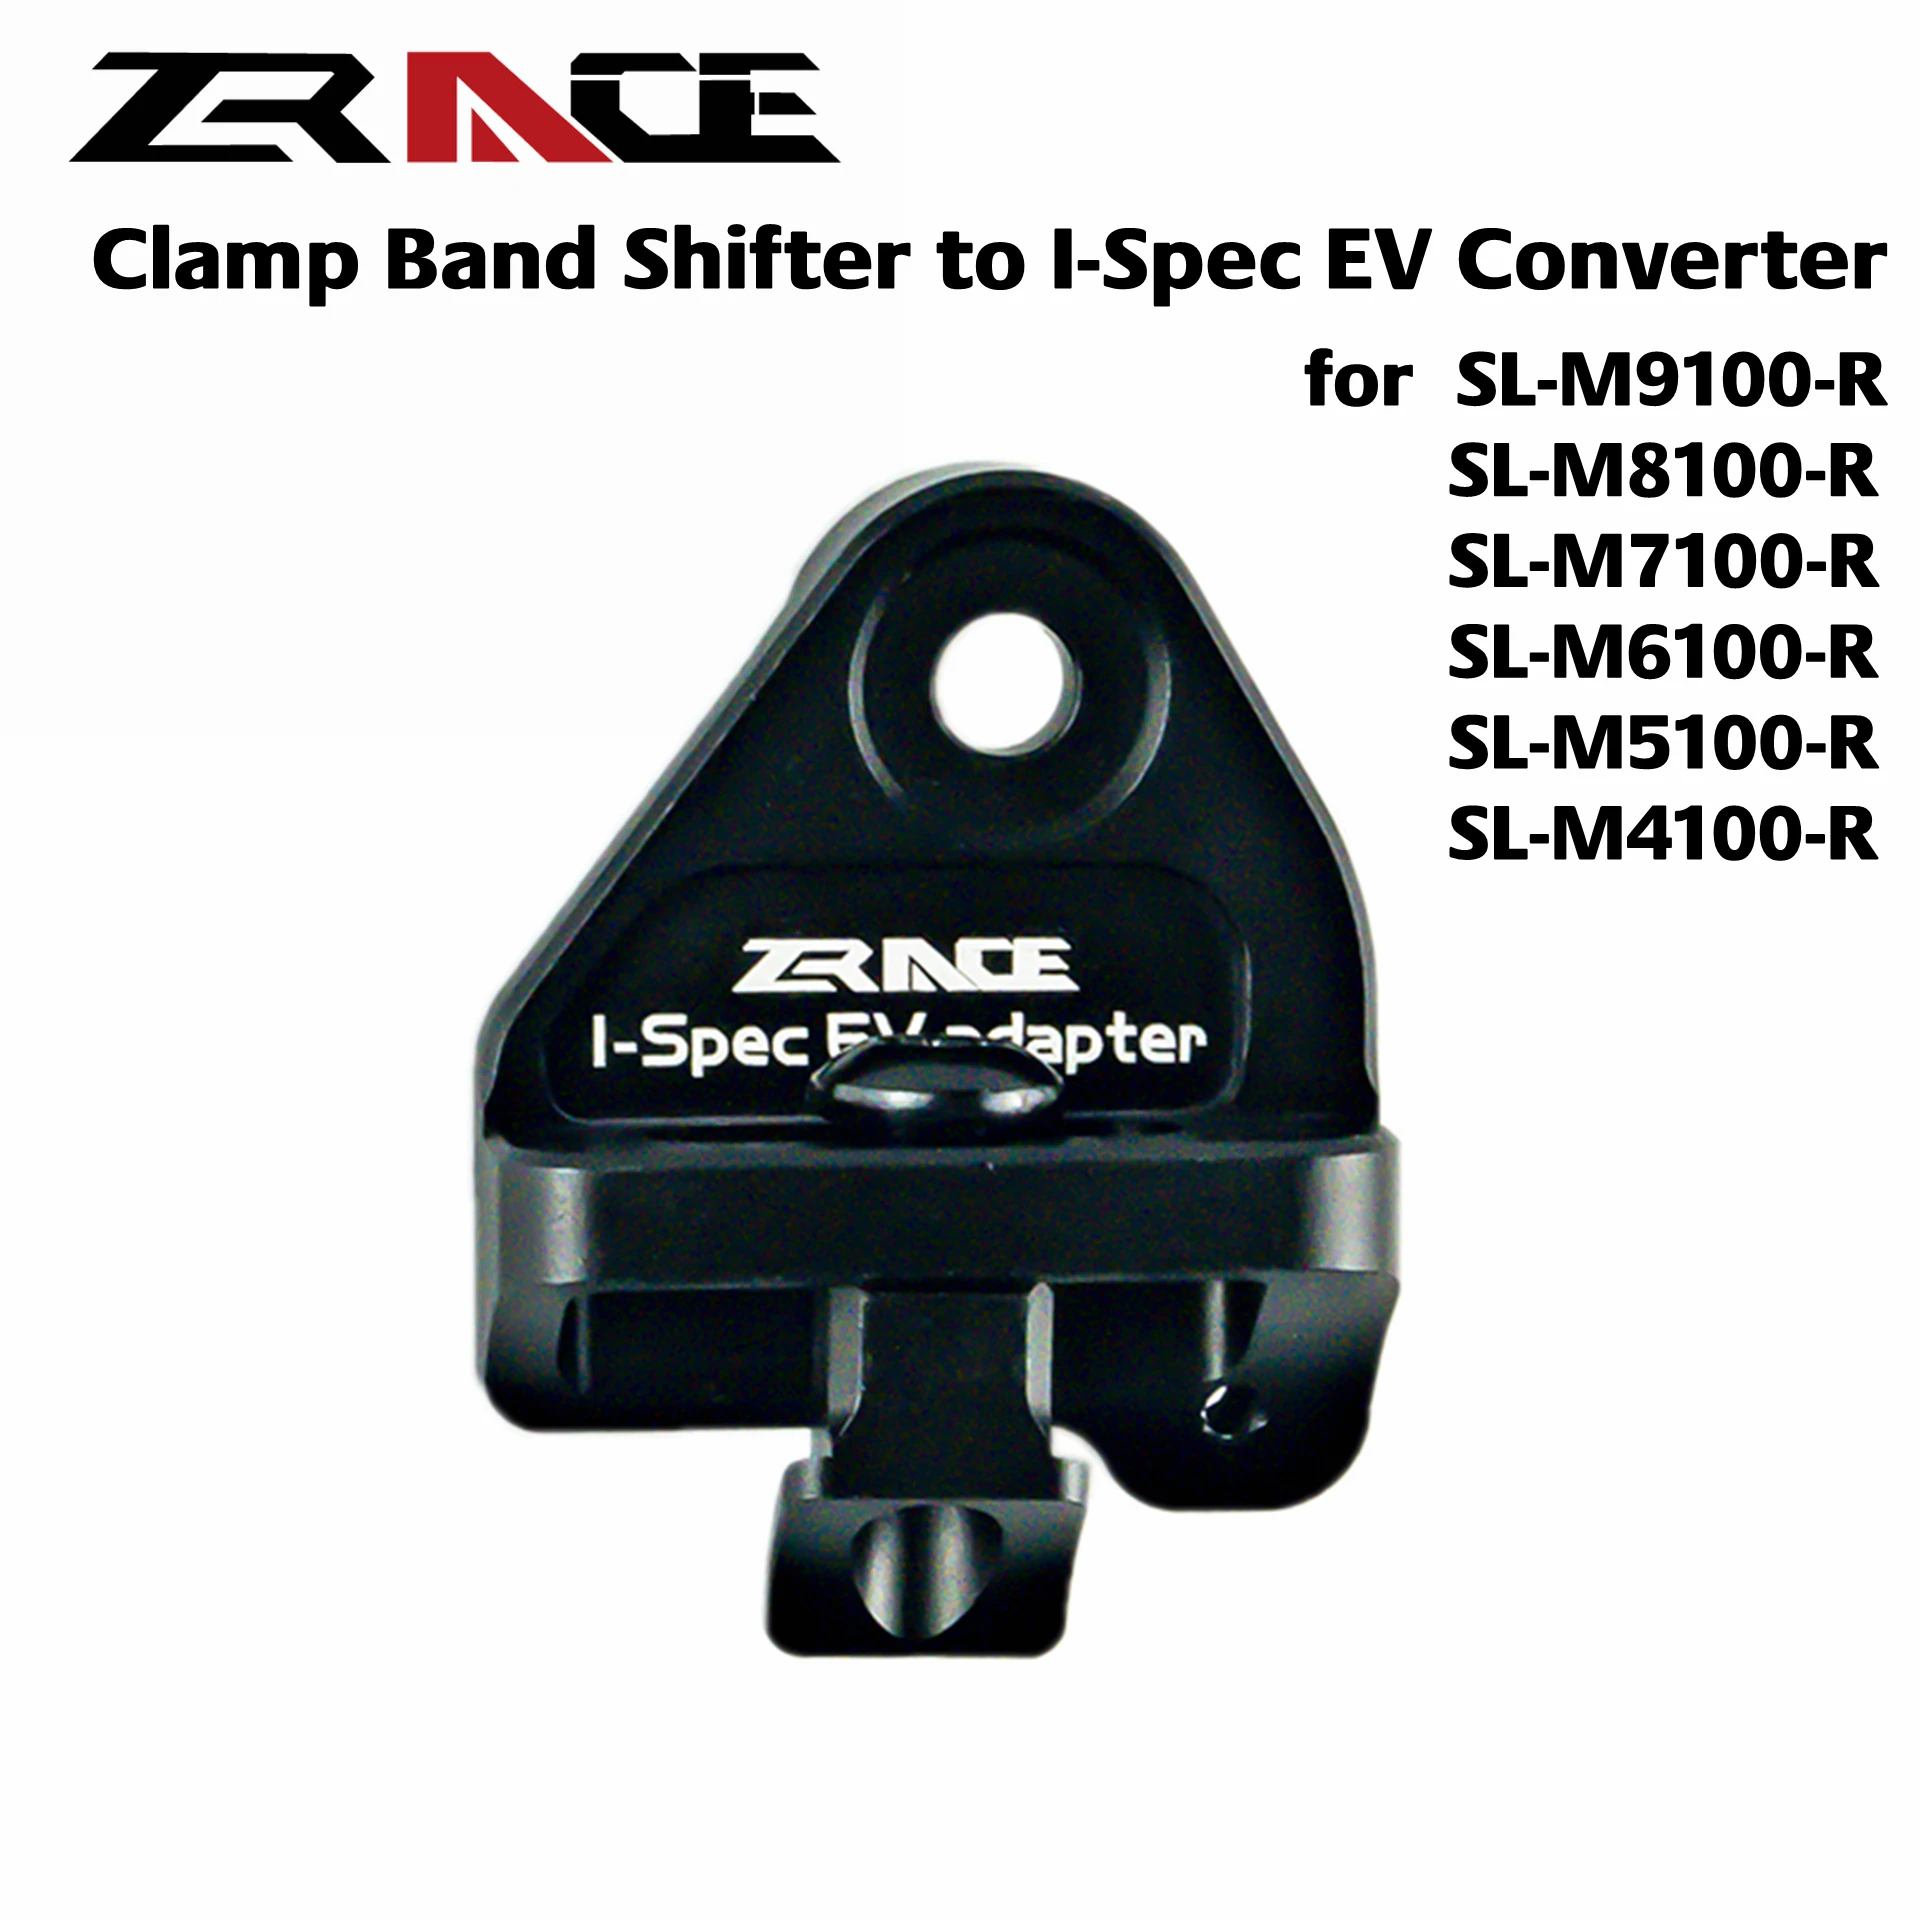 

ZRACE Clamp Band Shifter For XTR/XT/SLX/DEORE For SL-M9100/M8100/M7100/M6100/M5100/M4100 To I-Spec EV Converter Bicycle Parts